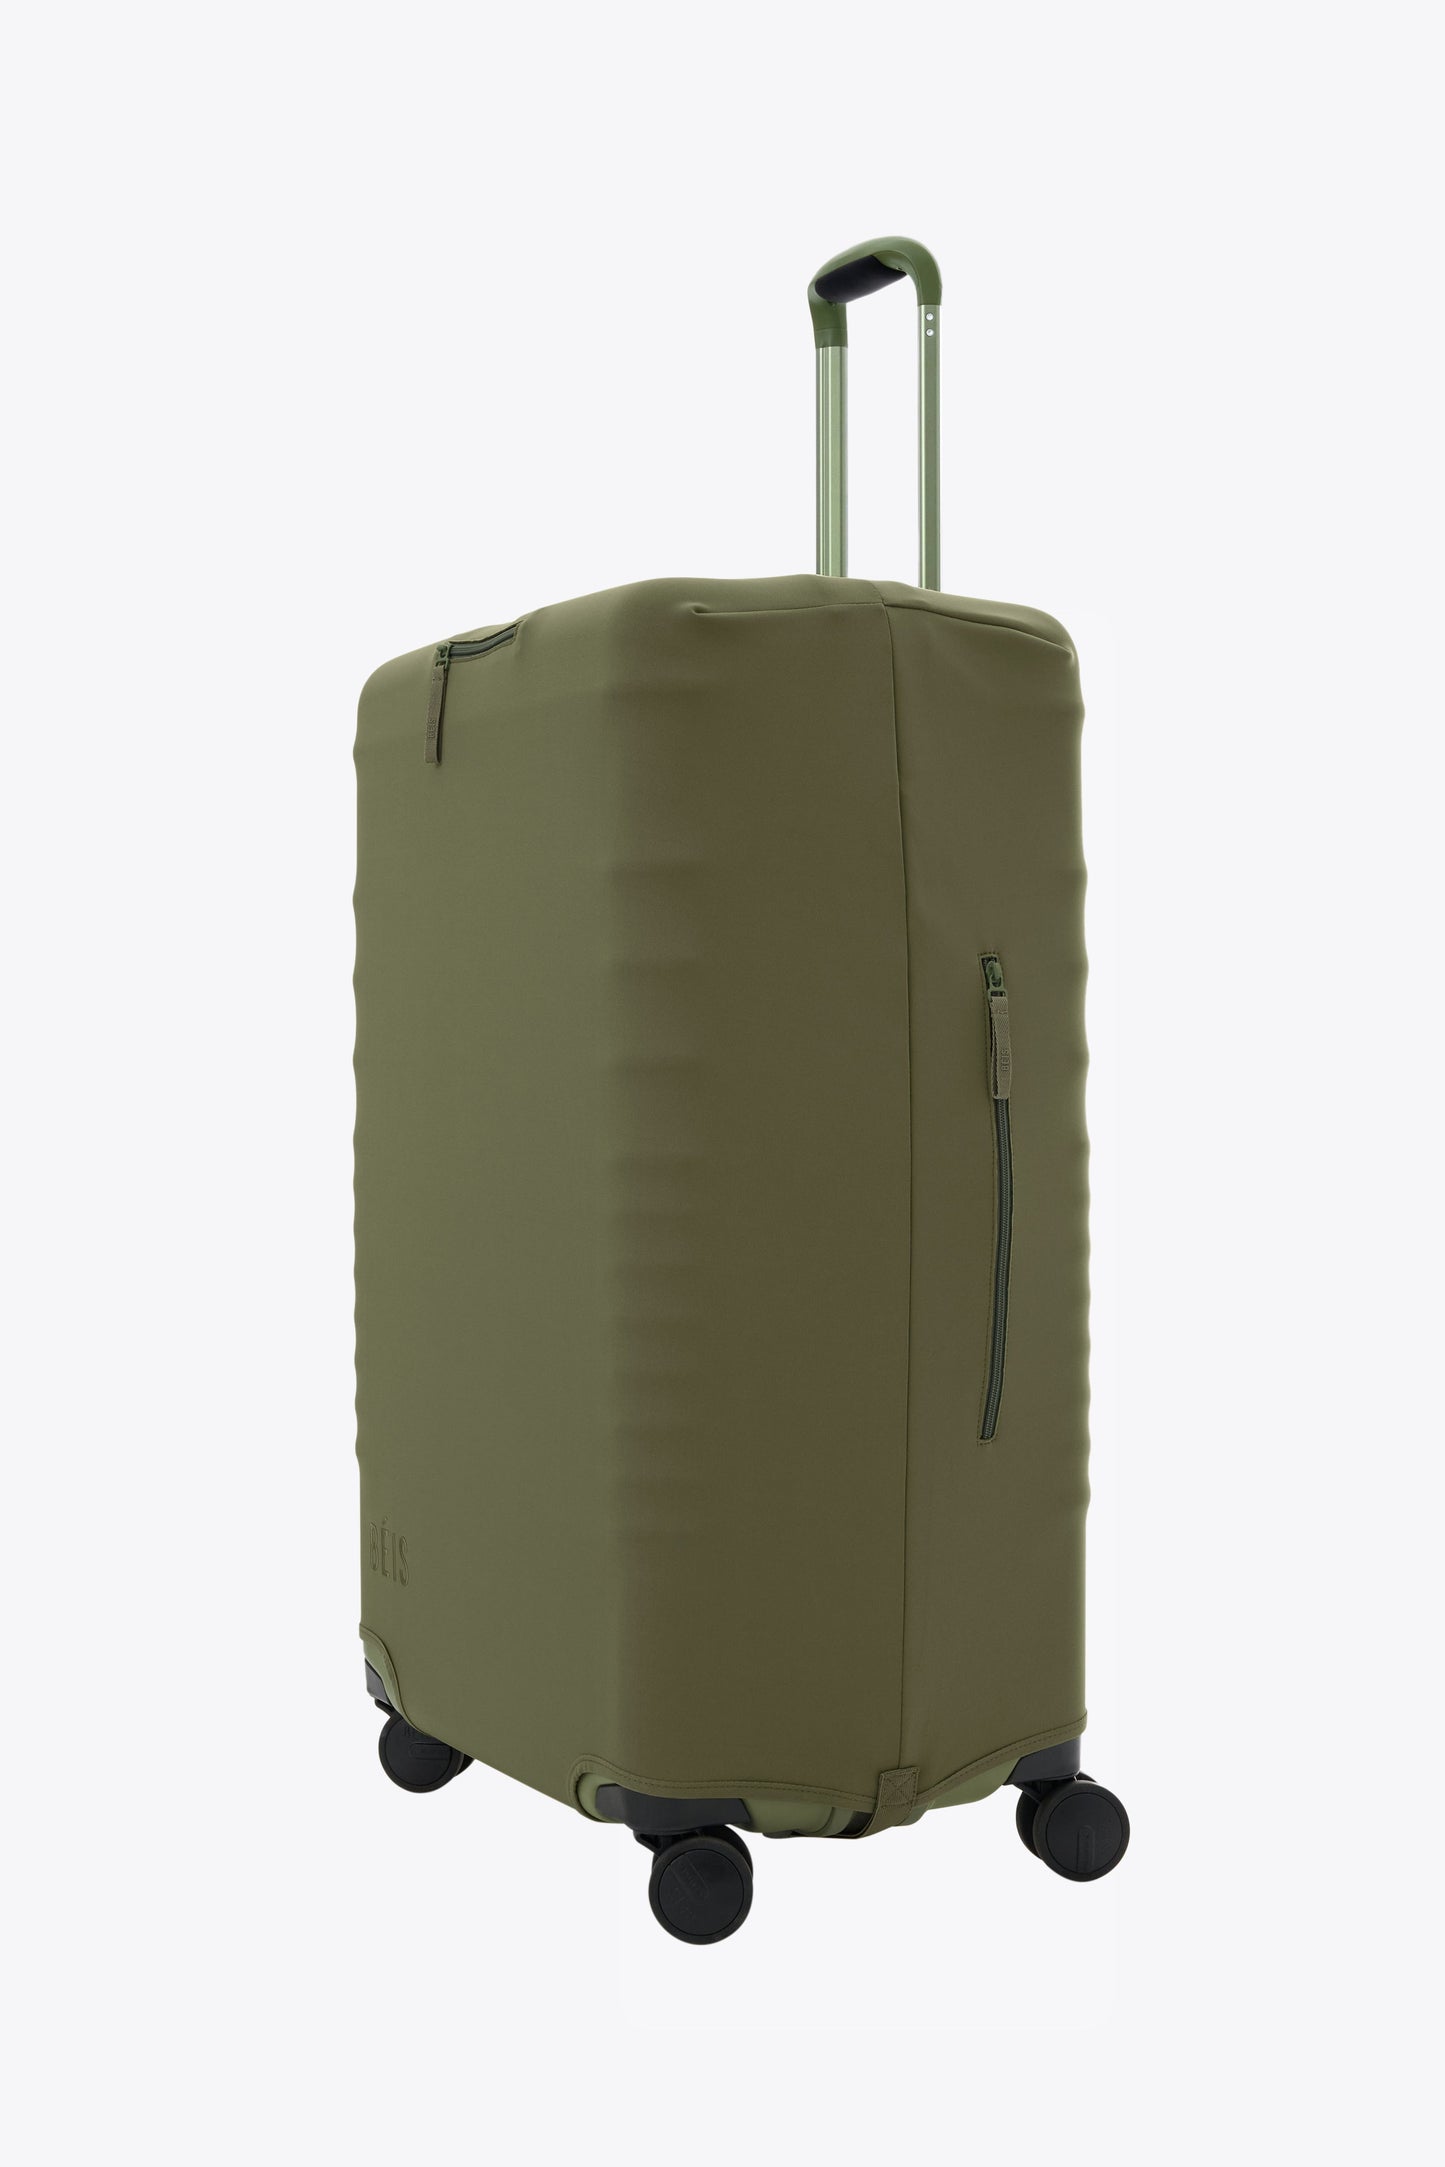 The Large Check-In Luggage Cover in Olive